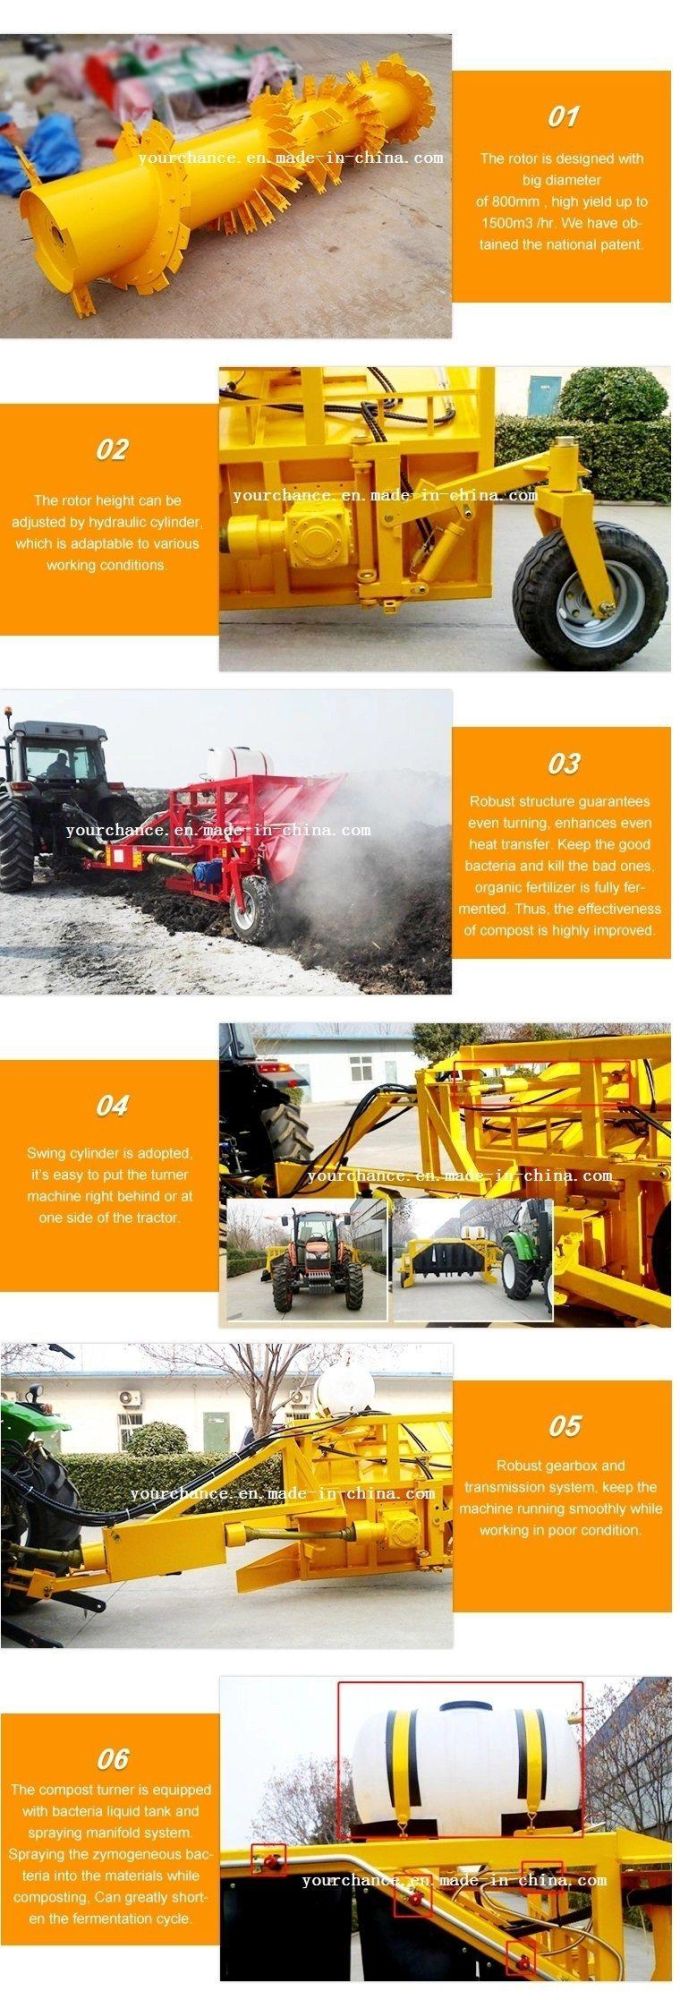 Hot Selling Compost Turning Machine Zfq Series 2-3.5m Width 50-180HP Tractor Towable Pto Drive Hydraulic Manure Compost Windrow Turner Machine